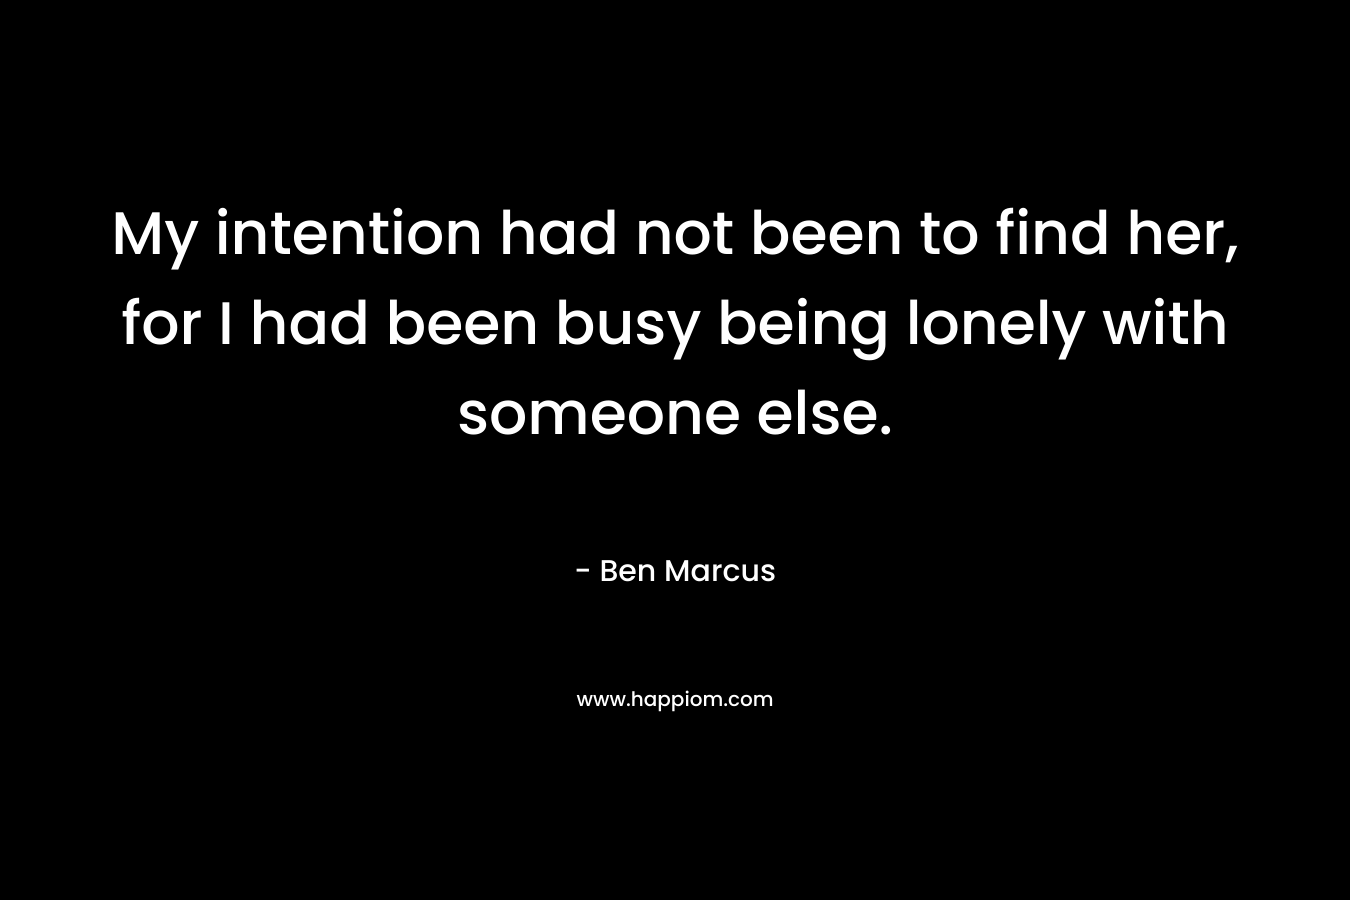 My intention had not been to find her, for I had been busy being lonely with someone else.